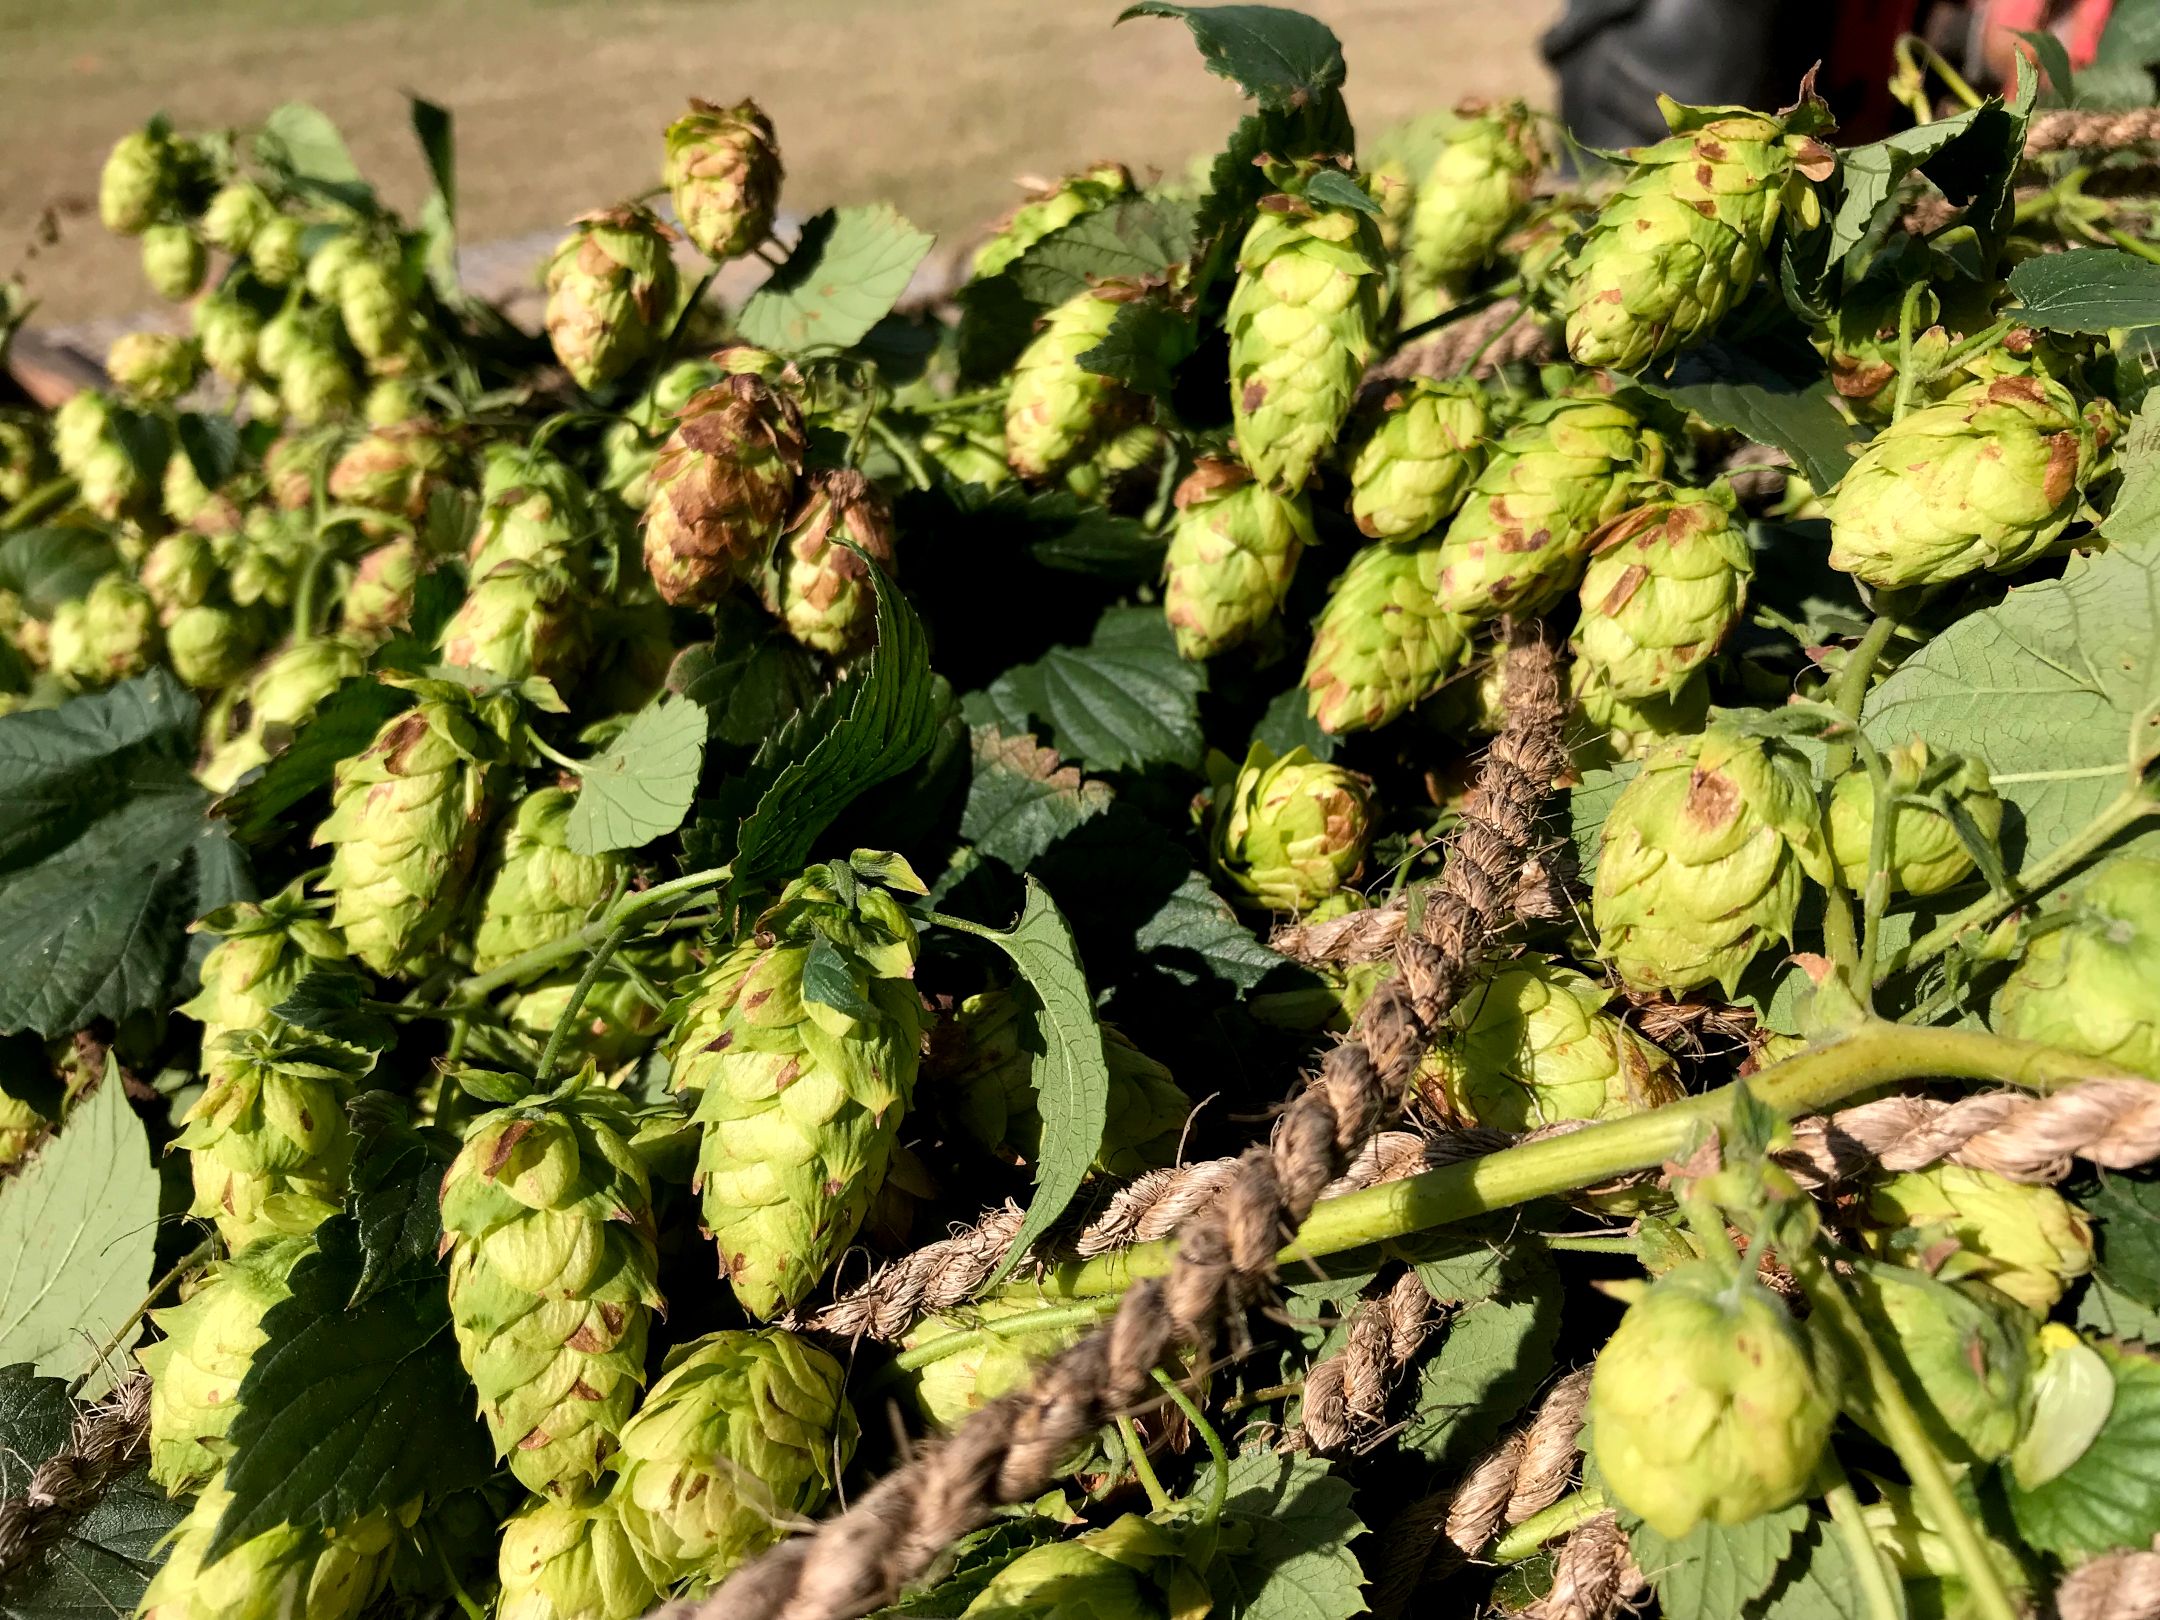 Ripe cones of ‘Cascade’ hops grown at the UF/IFAS GCREC. 